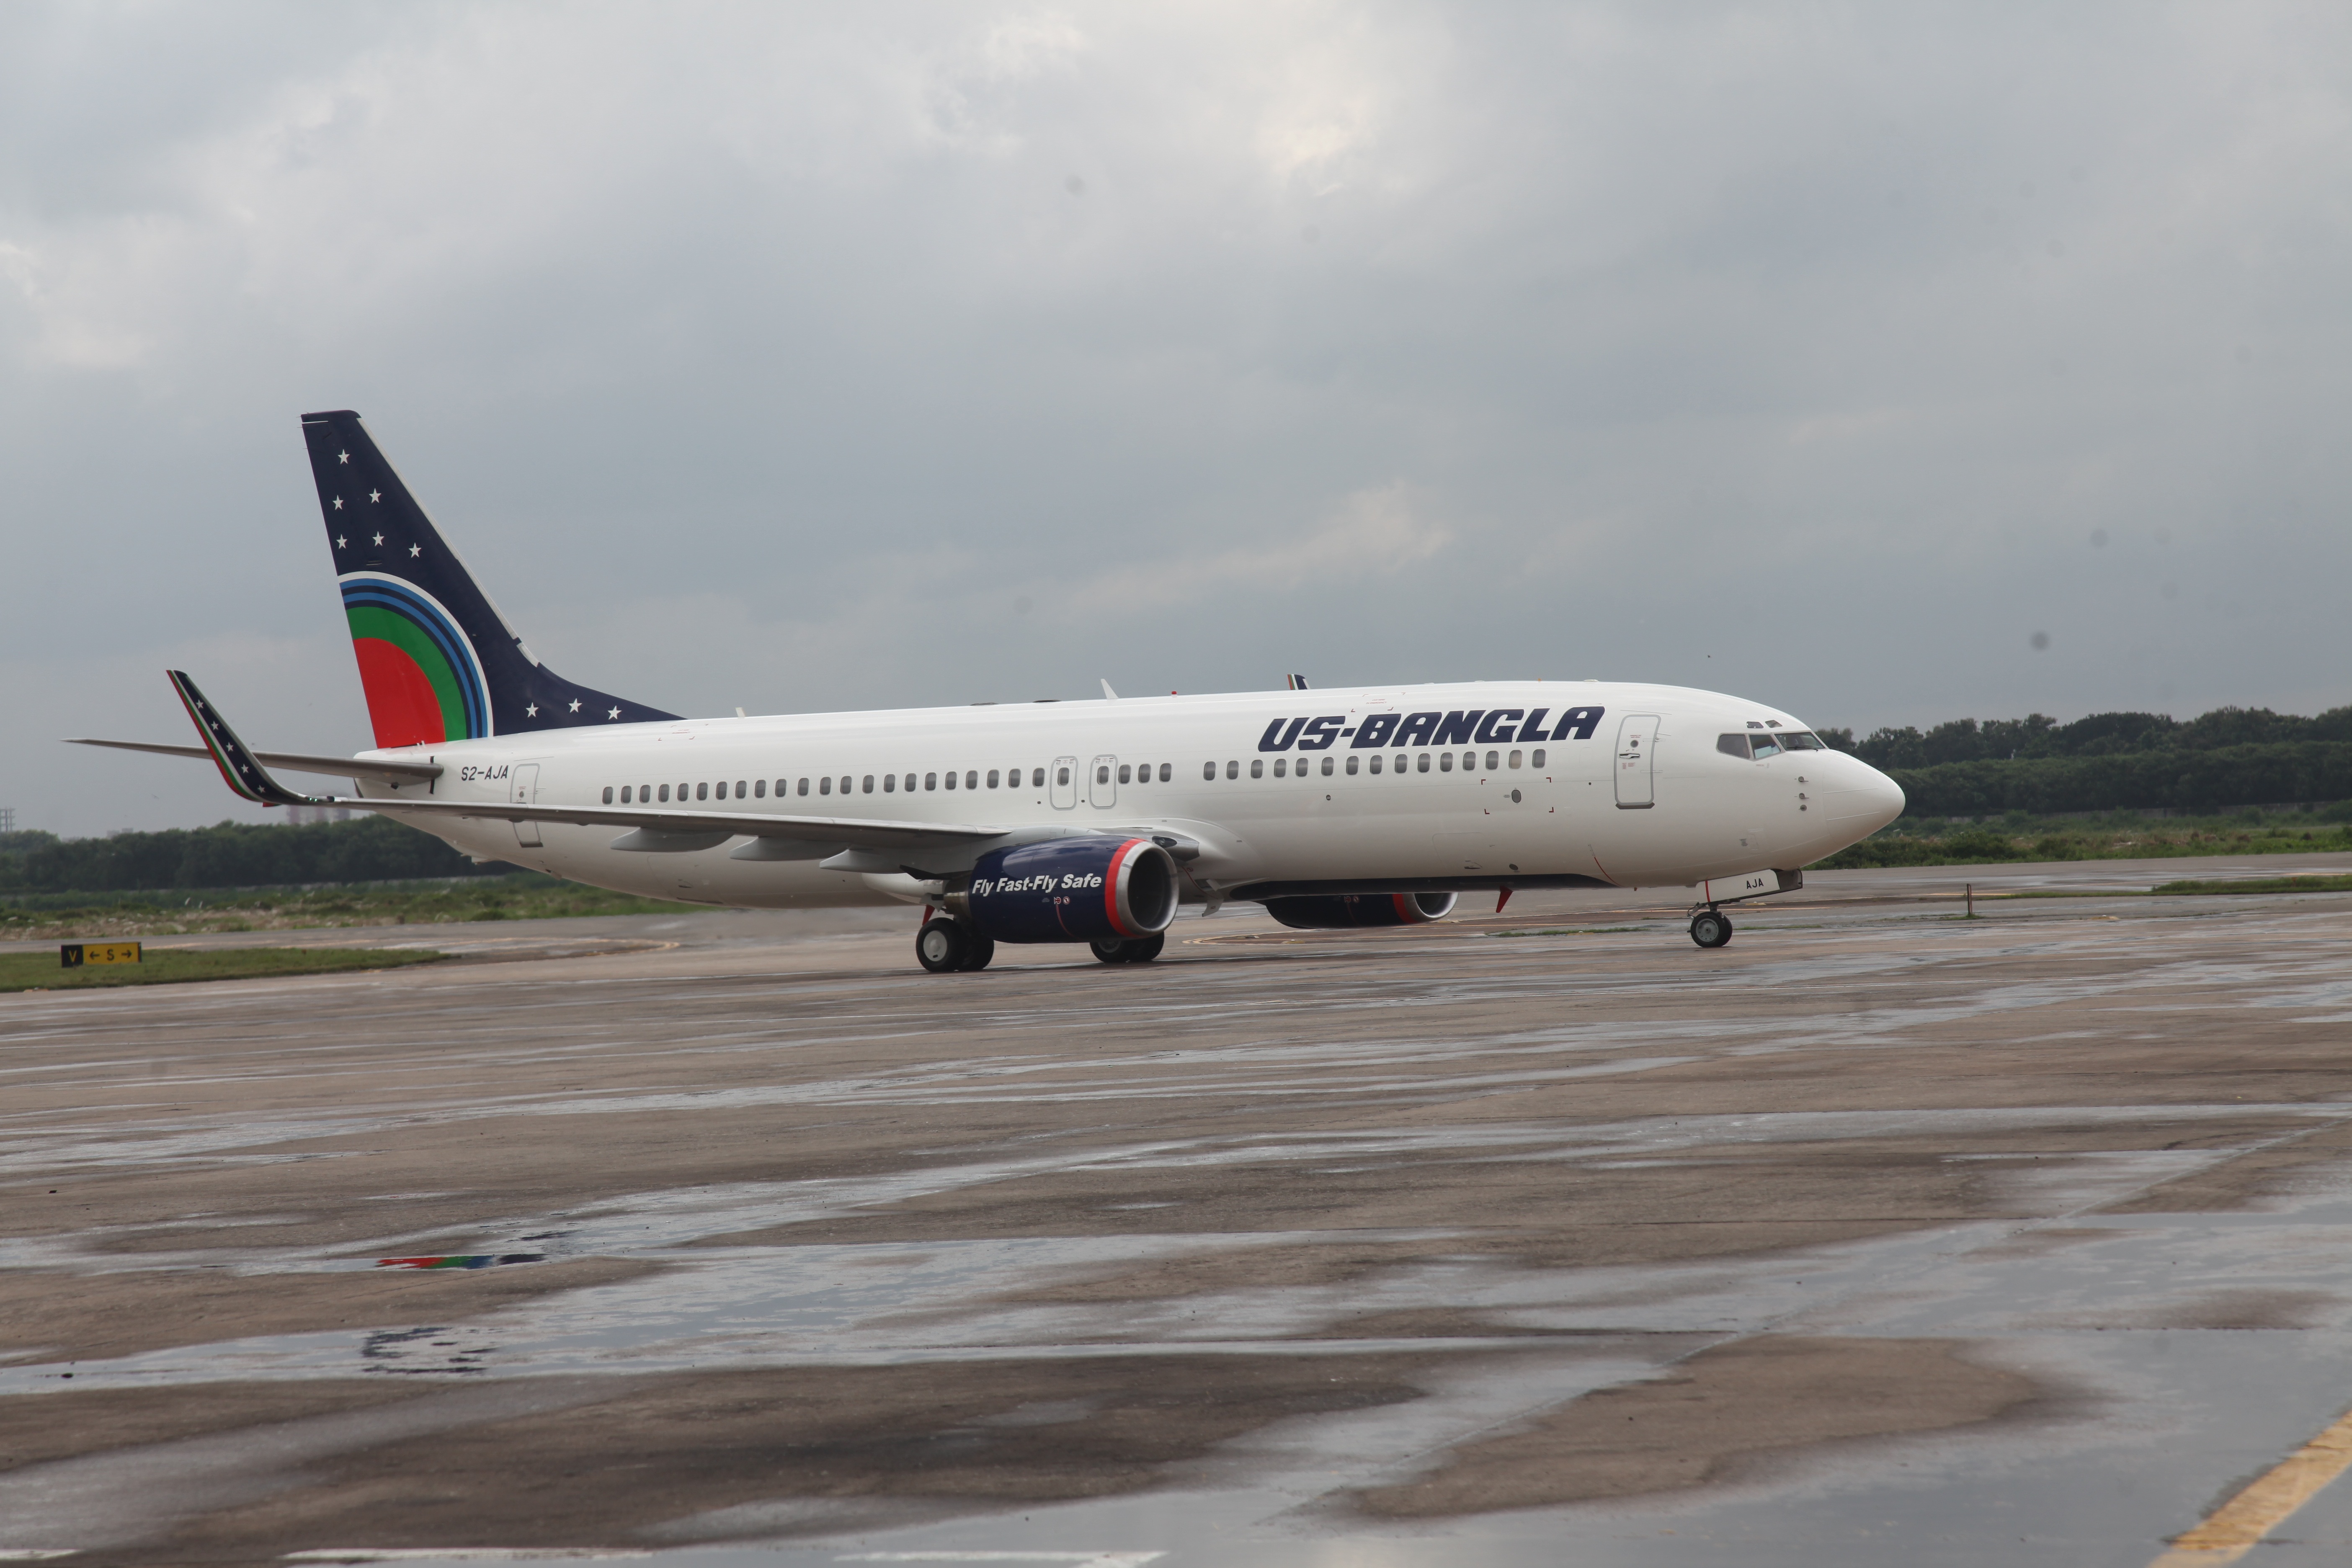 US-Bangla to add 2 Boeing 737-800 to its fleet in November